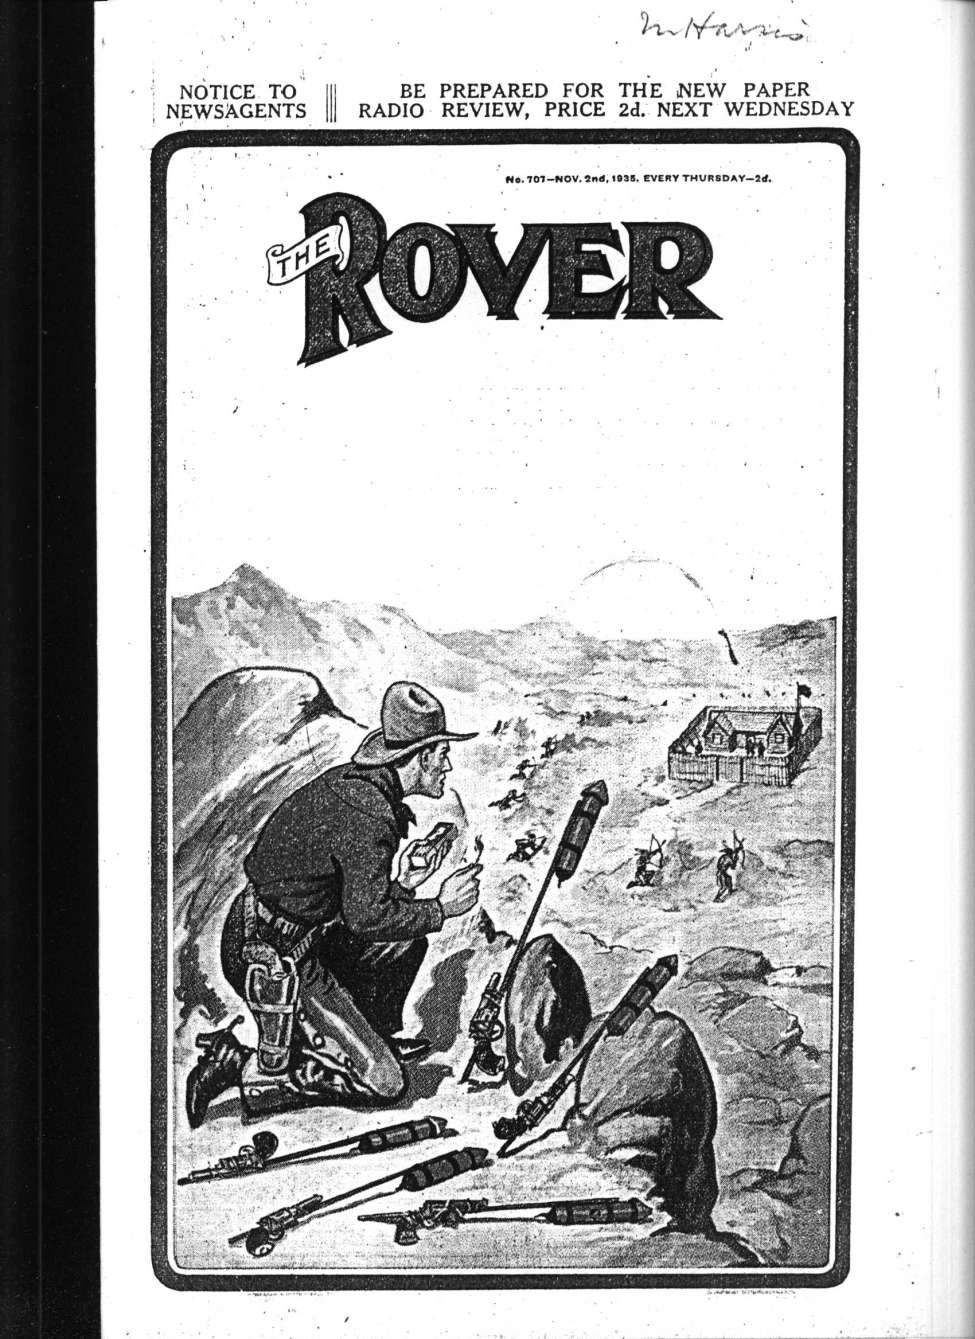 Book Cover For The Rover 707